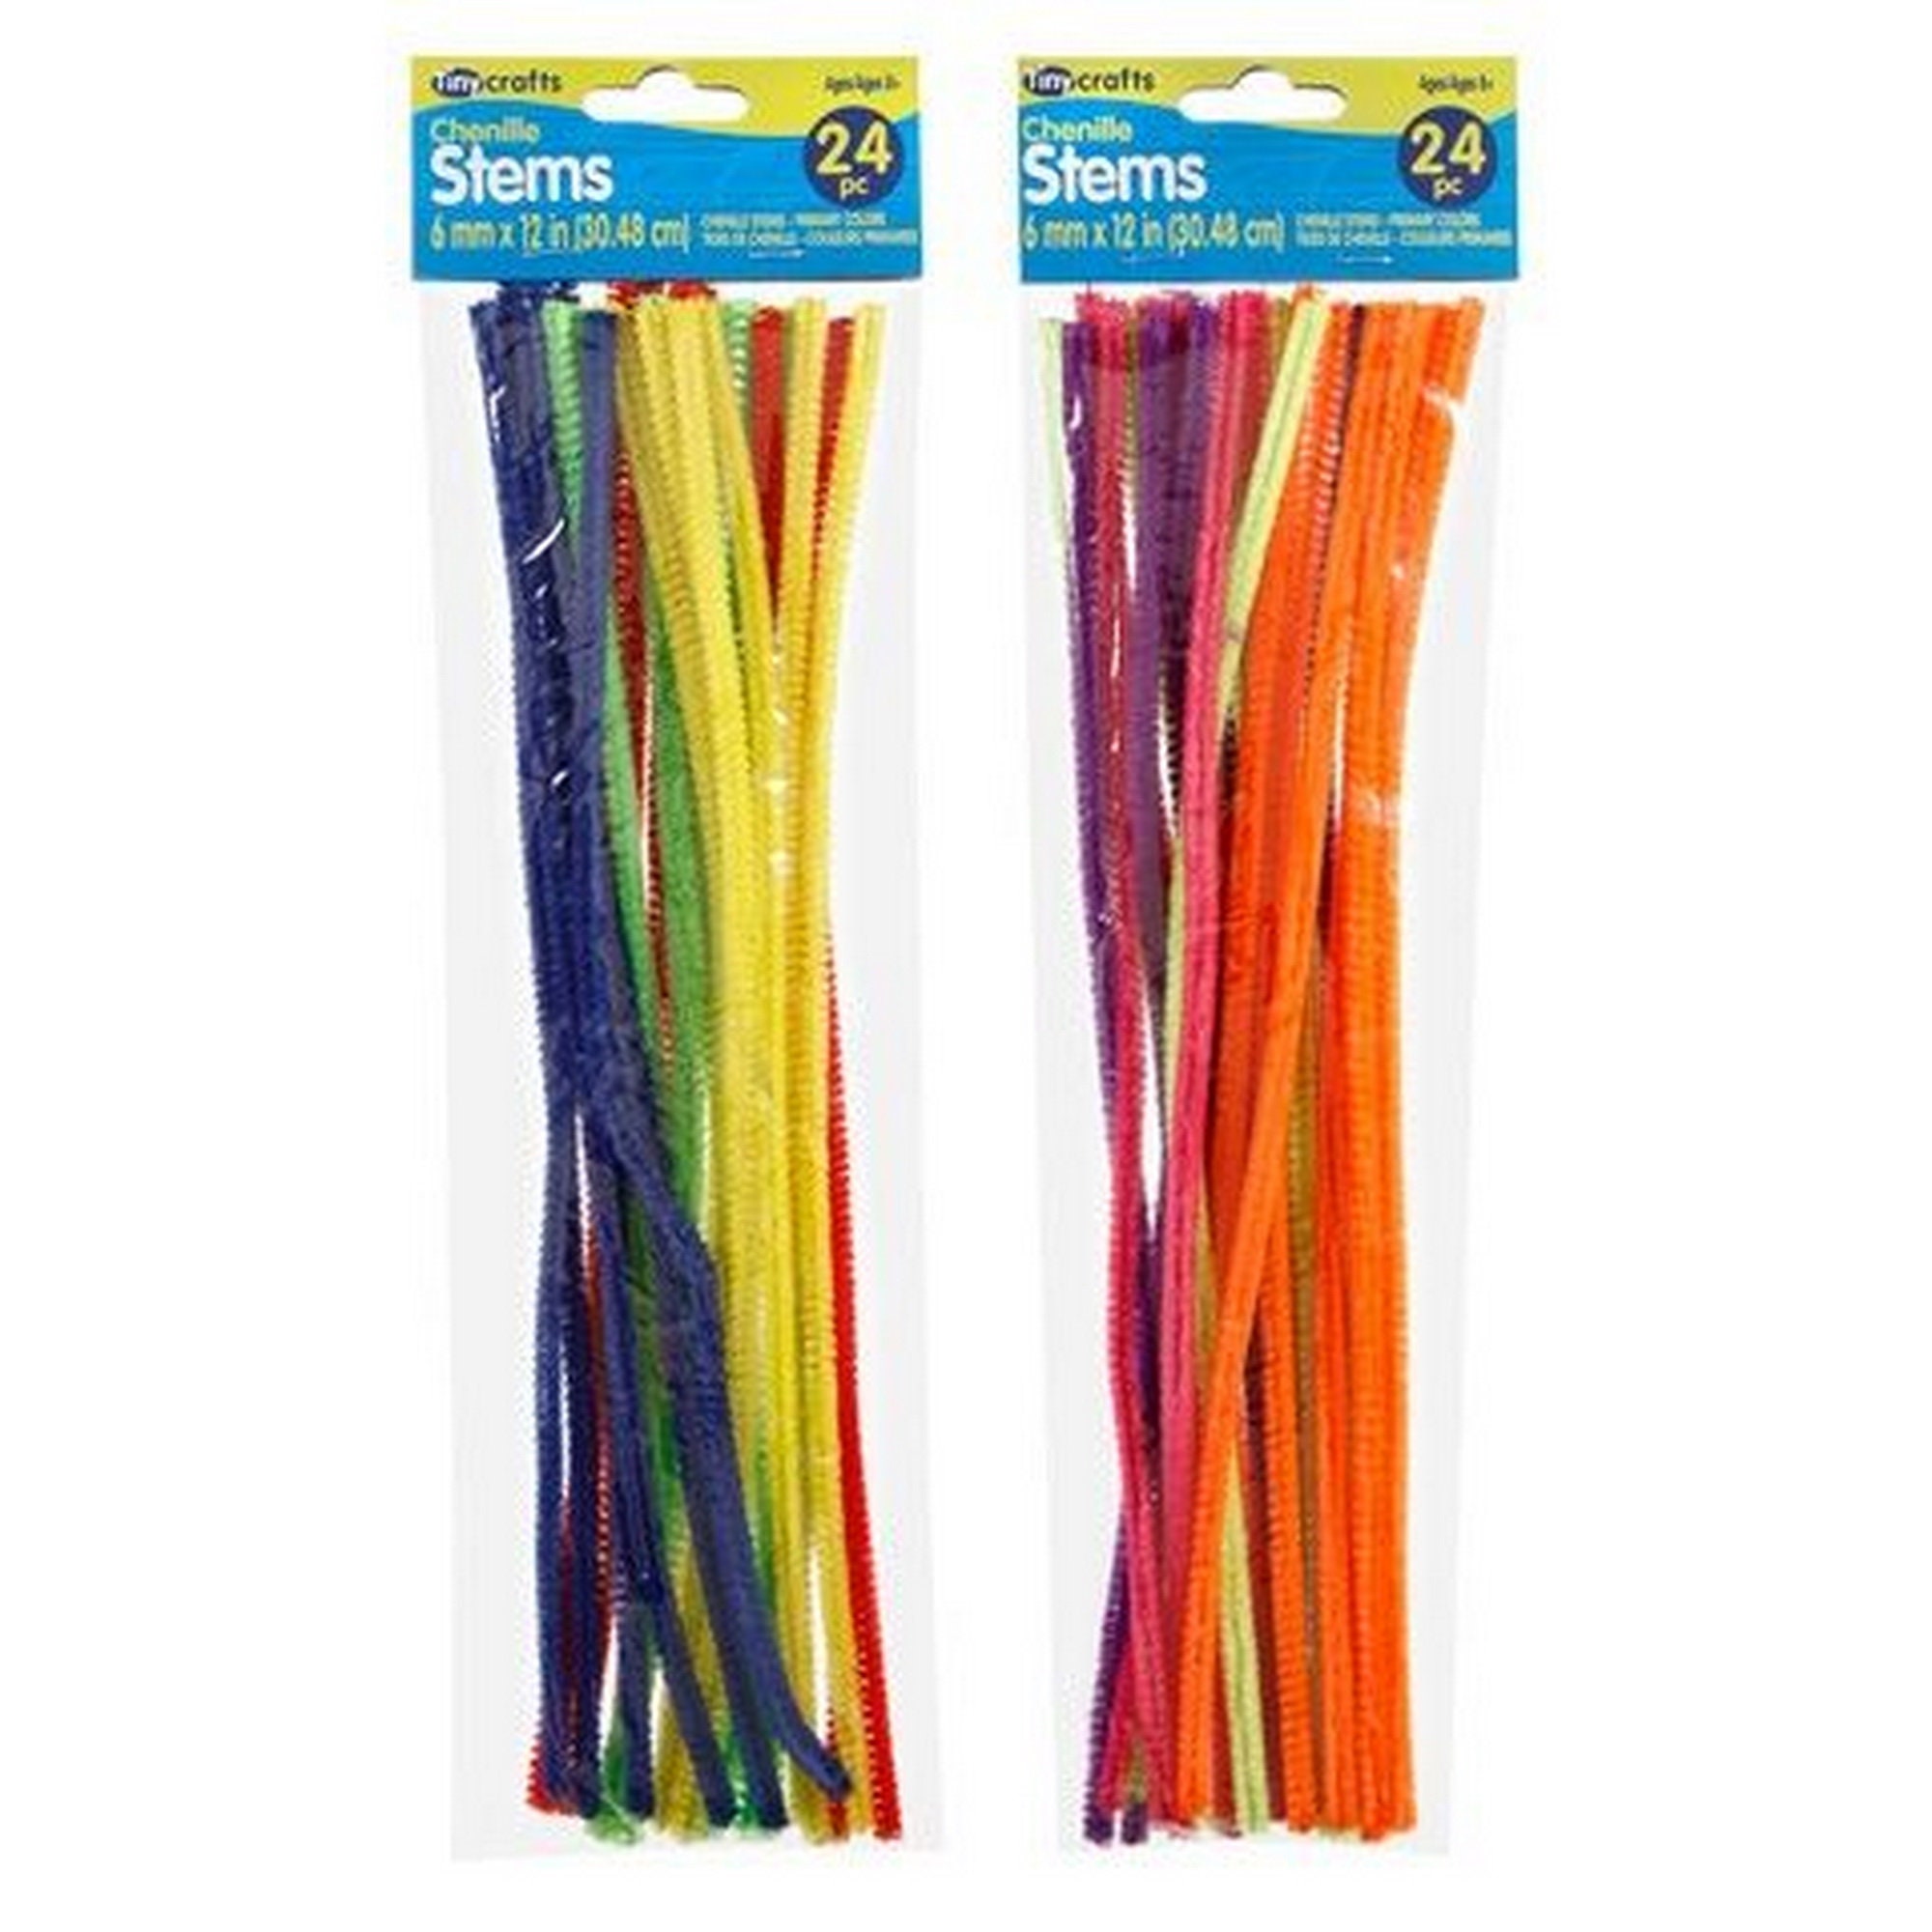 100 Pieces Pipe Cleaners 24 Assorted Colored Chenille Stems For Art Crafts